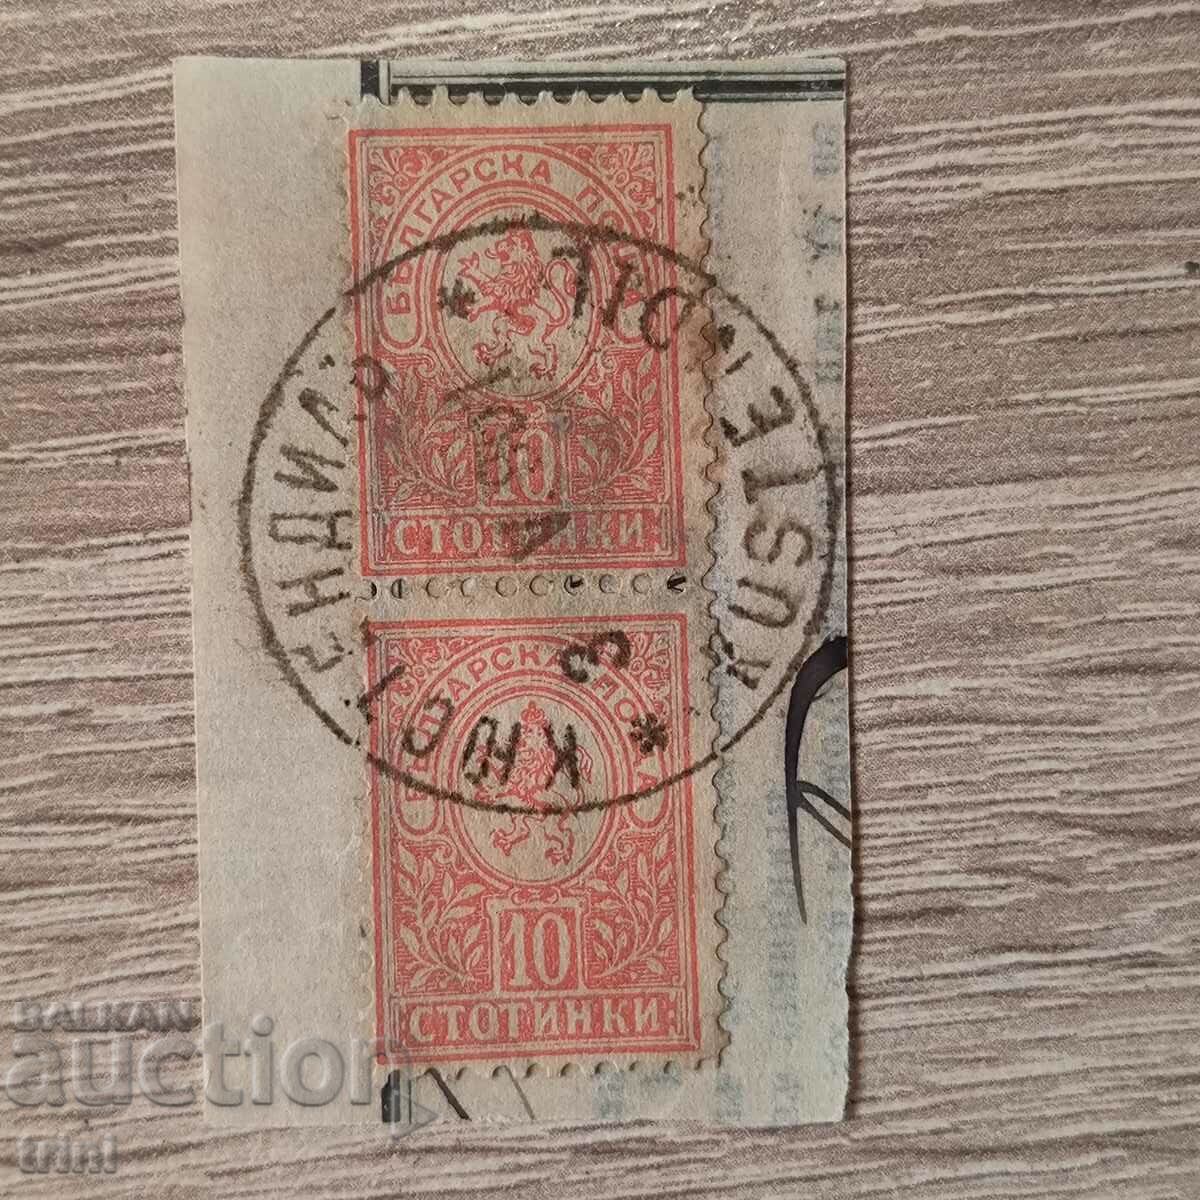 Bulgaria Small lion 1889 2 X 10th cent stamp Kyustendil